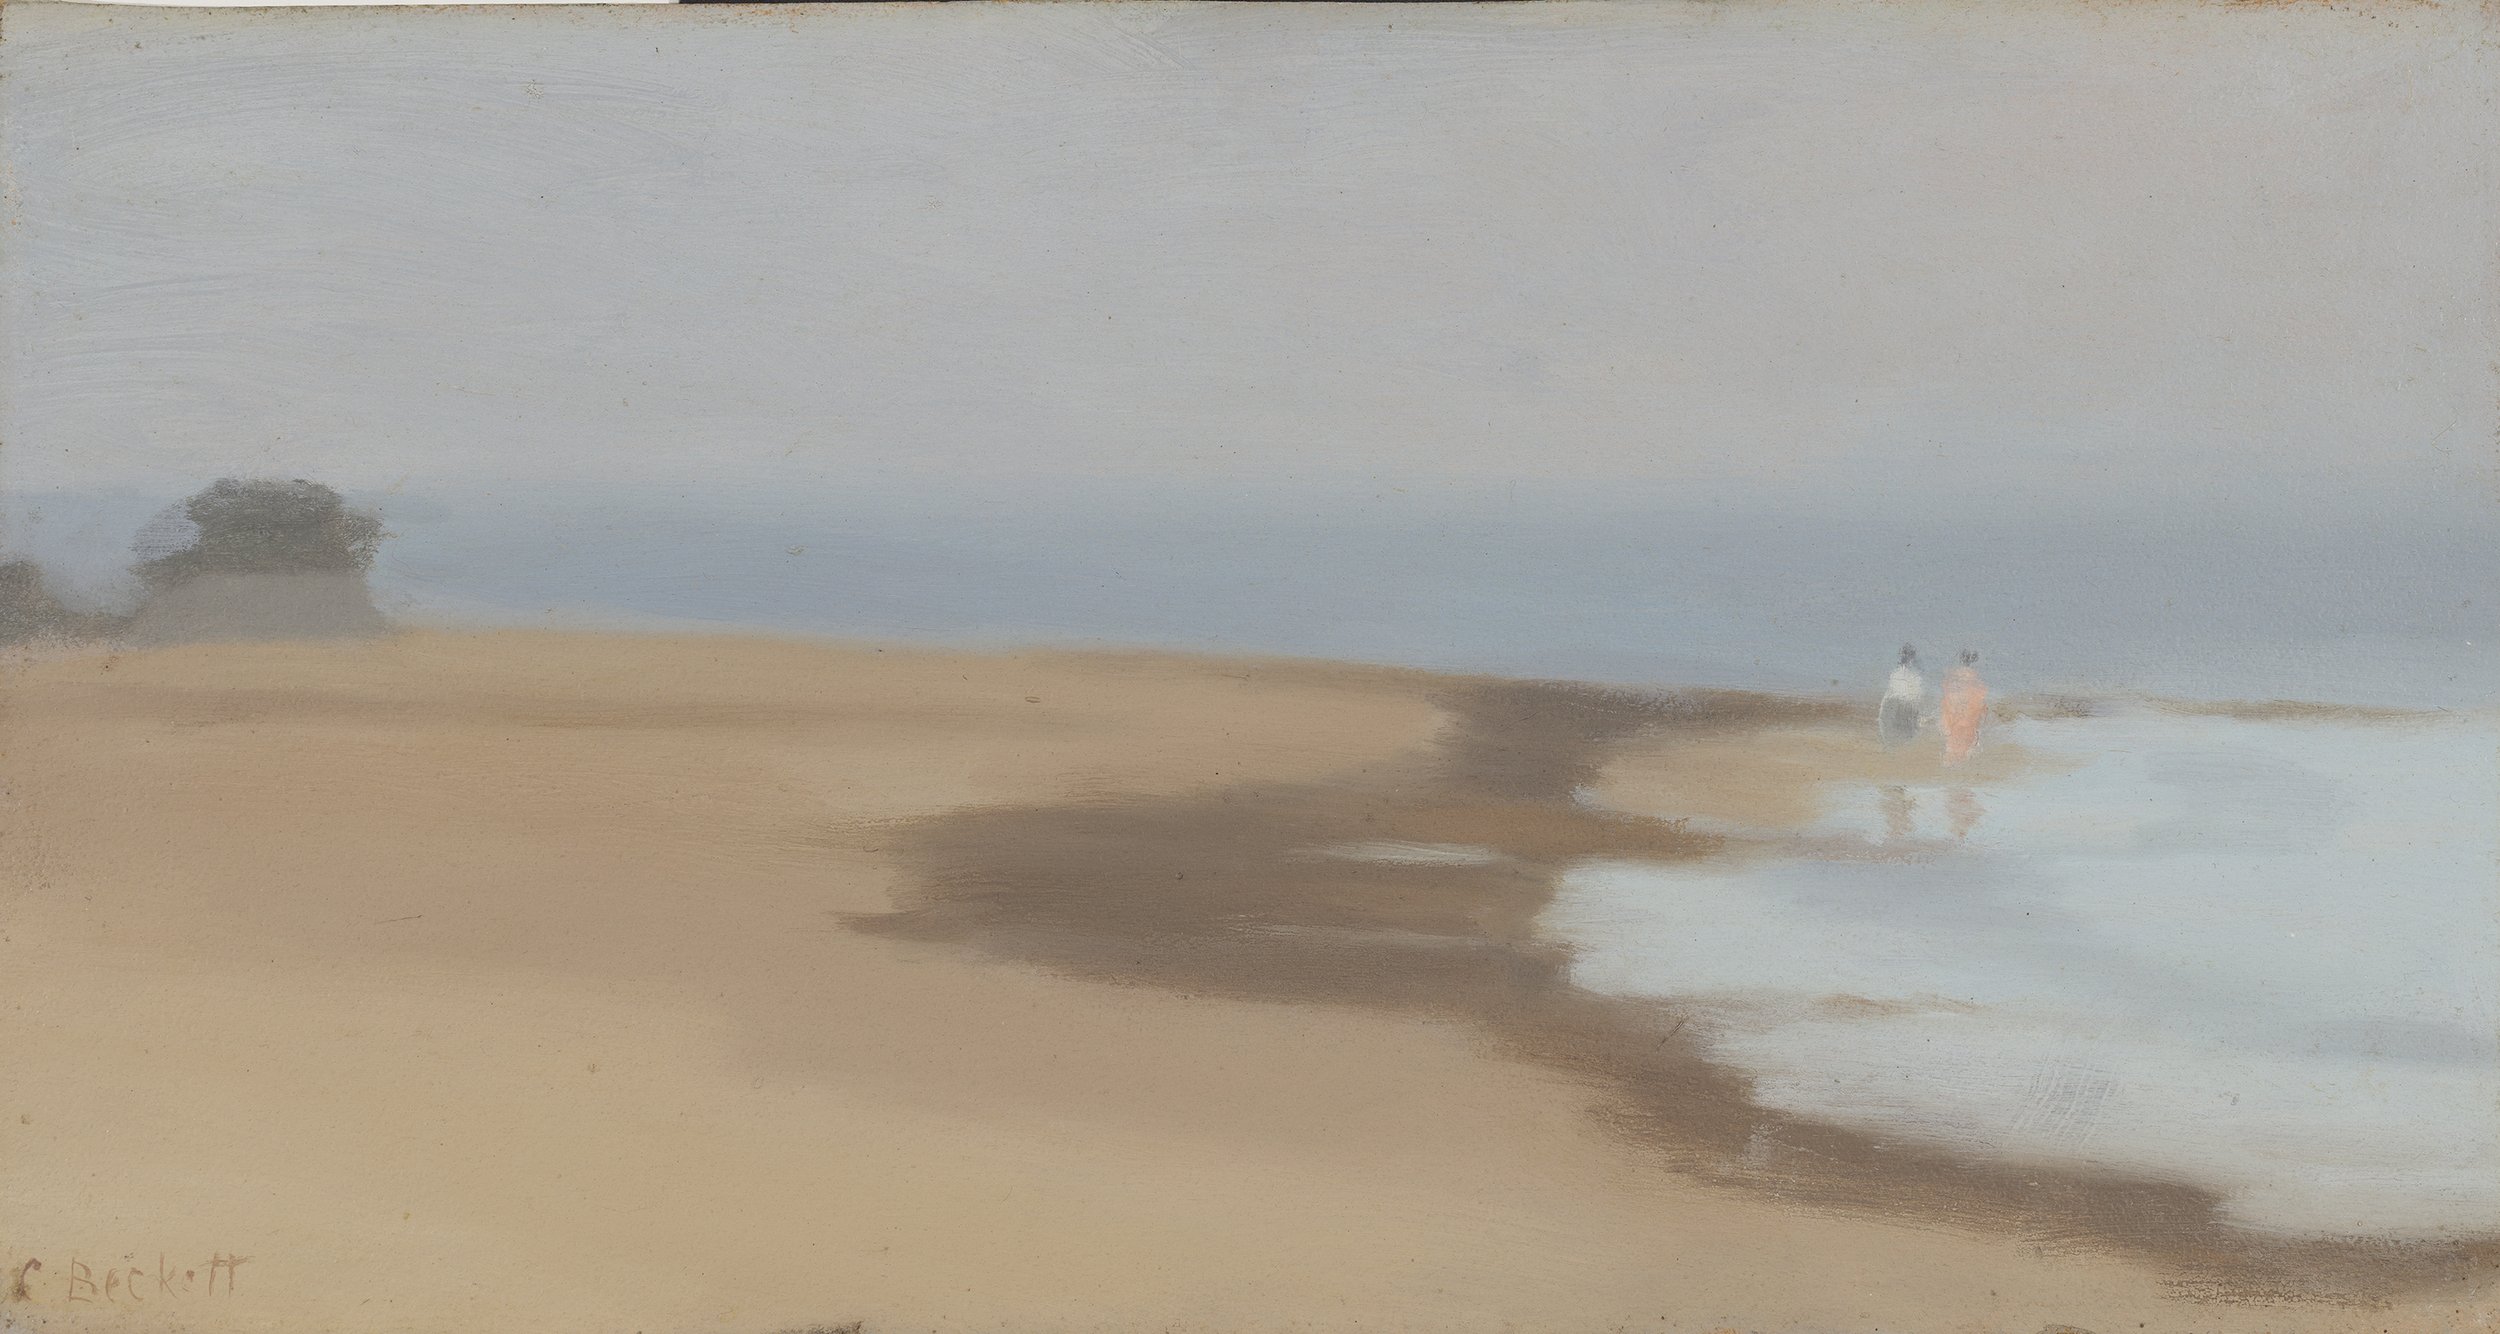  Clarice Beckett,  The beach , c. 1930, oil on board, 23 x 43.7cm; Art Gallery of Ballarat, acquired through the Maud Rowe Bequest, 1937; frame conserved with funds from the U3A History of the Art Gallery class, 2017 